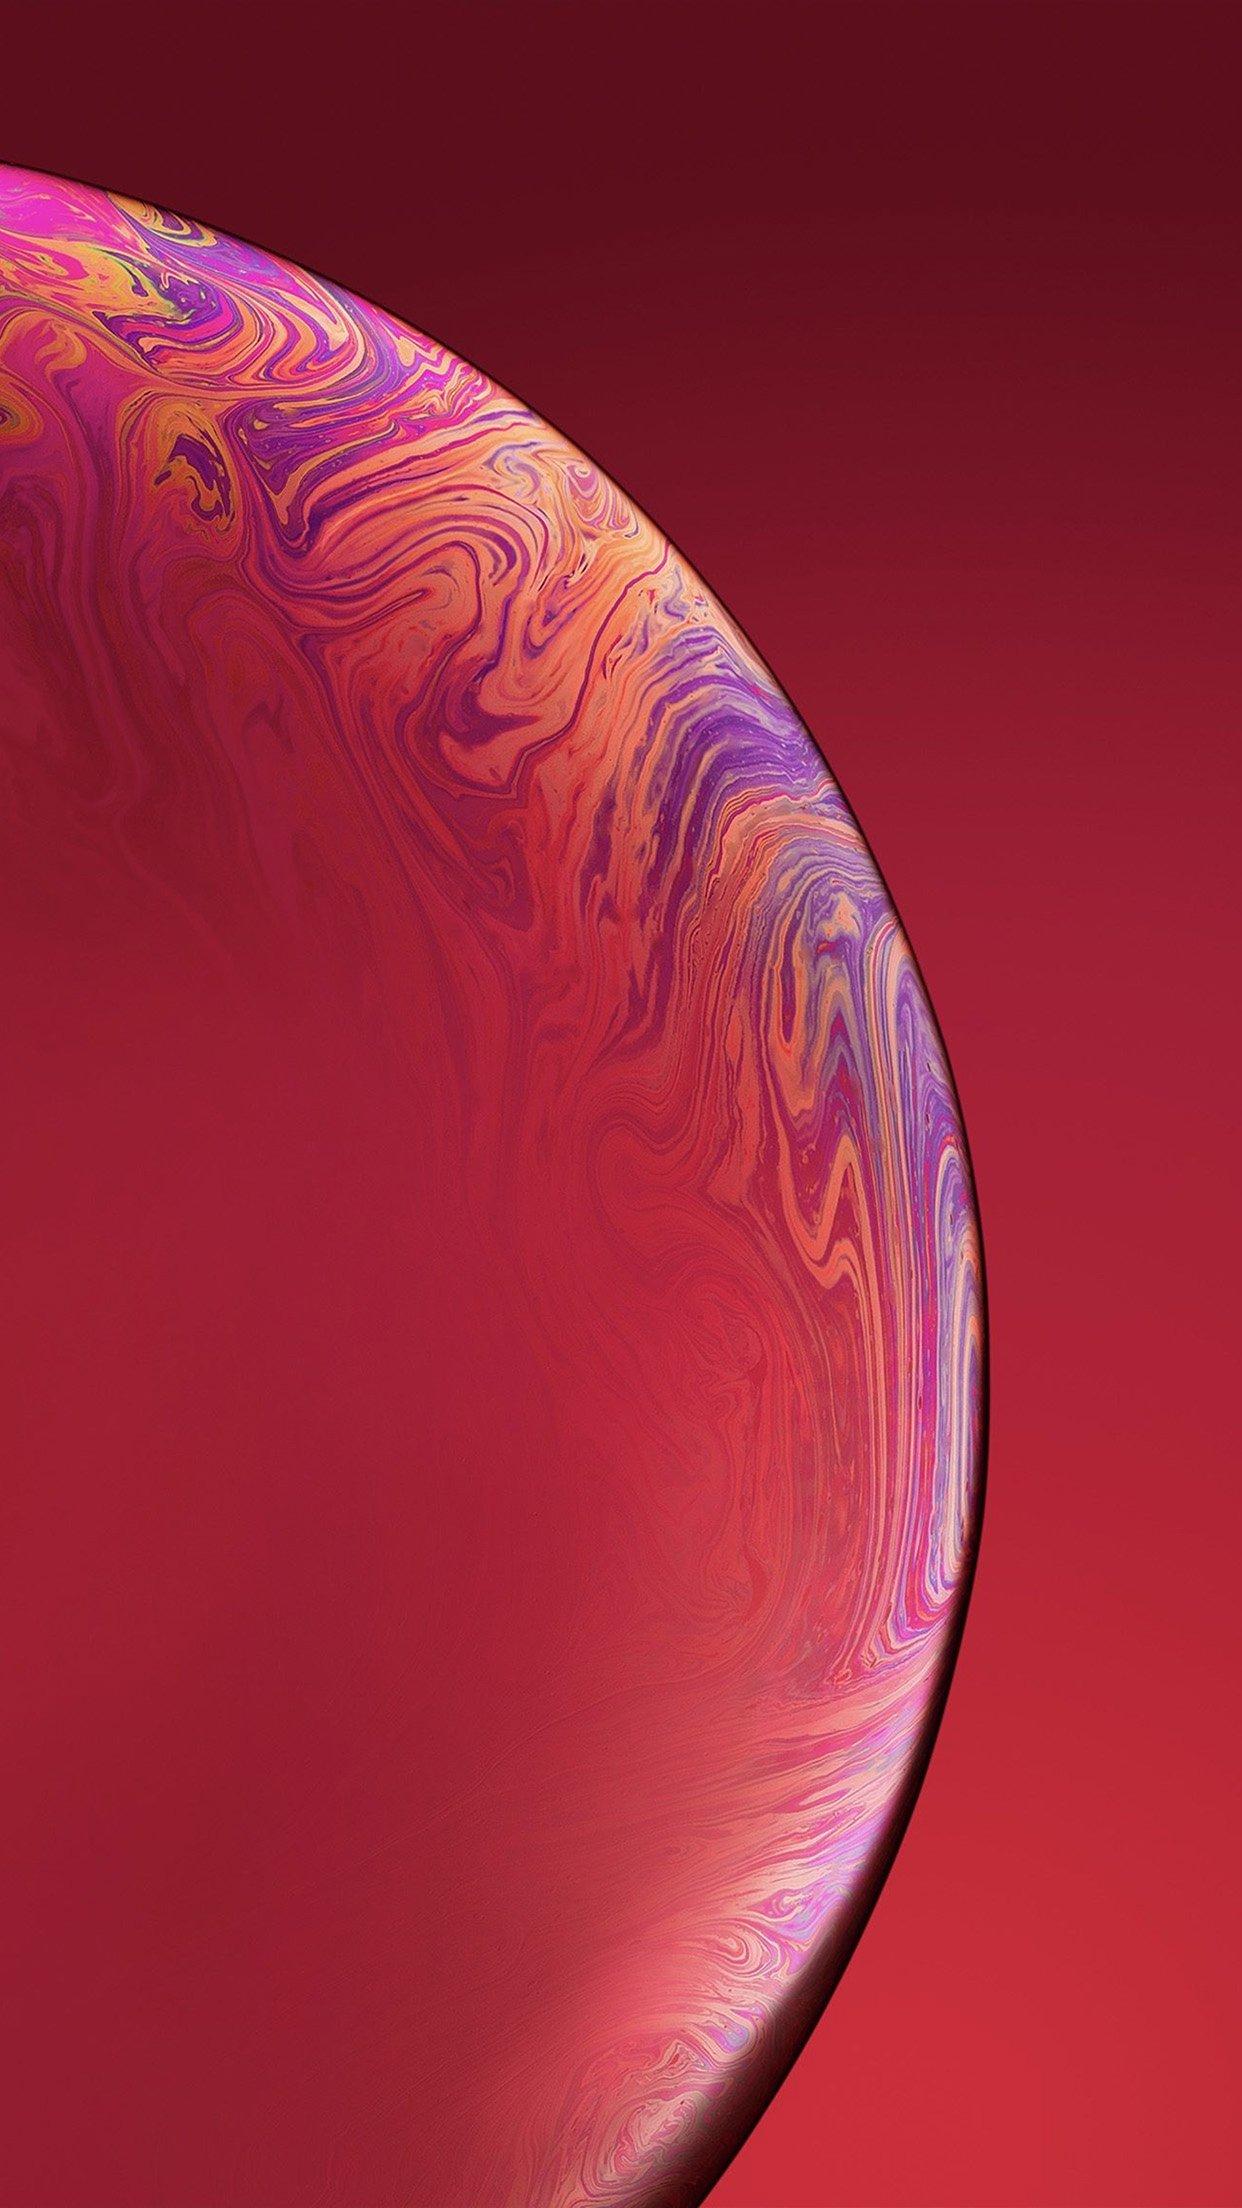 iPhone7 wallpaper. red apple iphone xs max